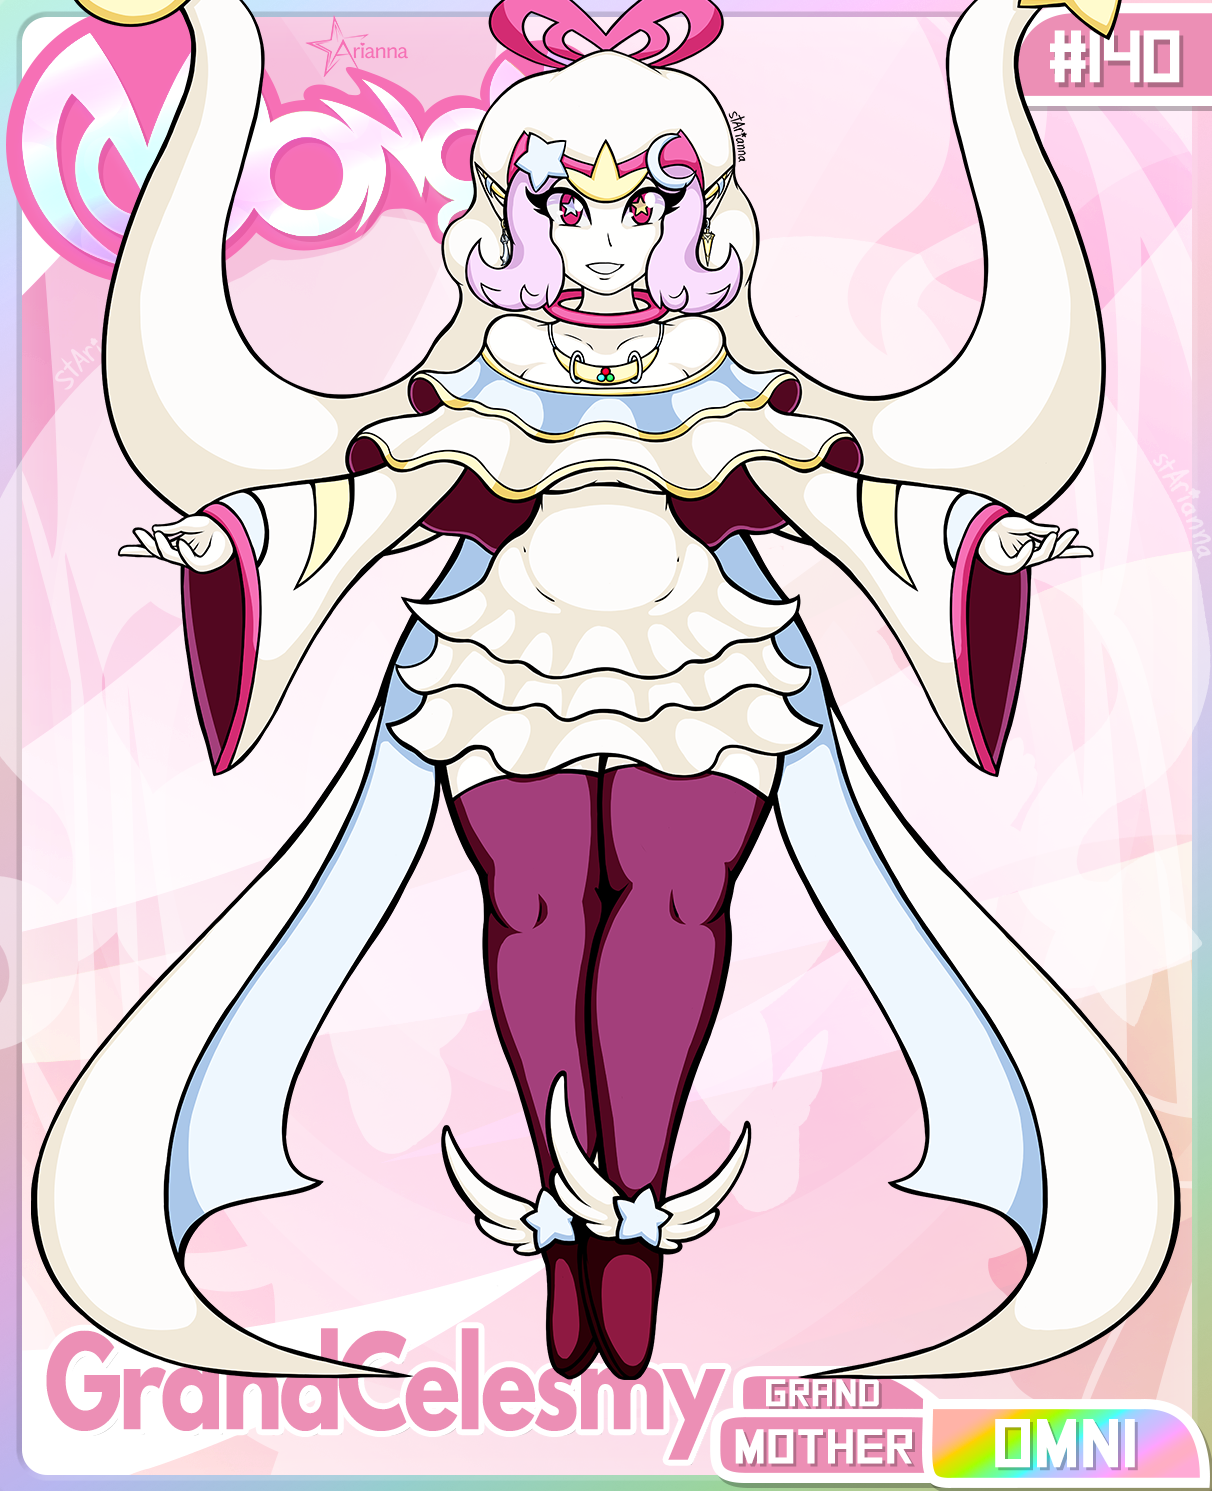 GrandCelesmy, Monommy #140, the grand mother, omni-type